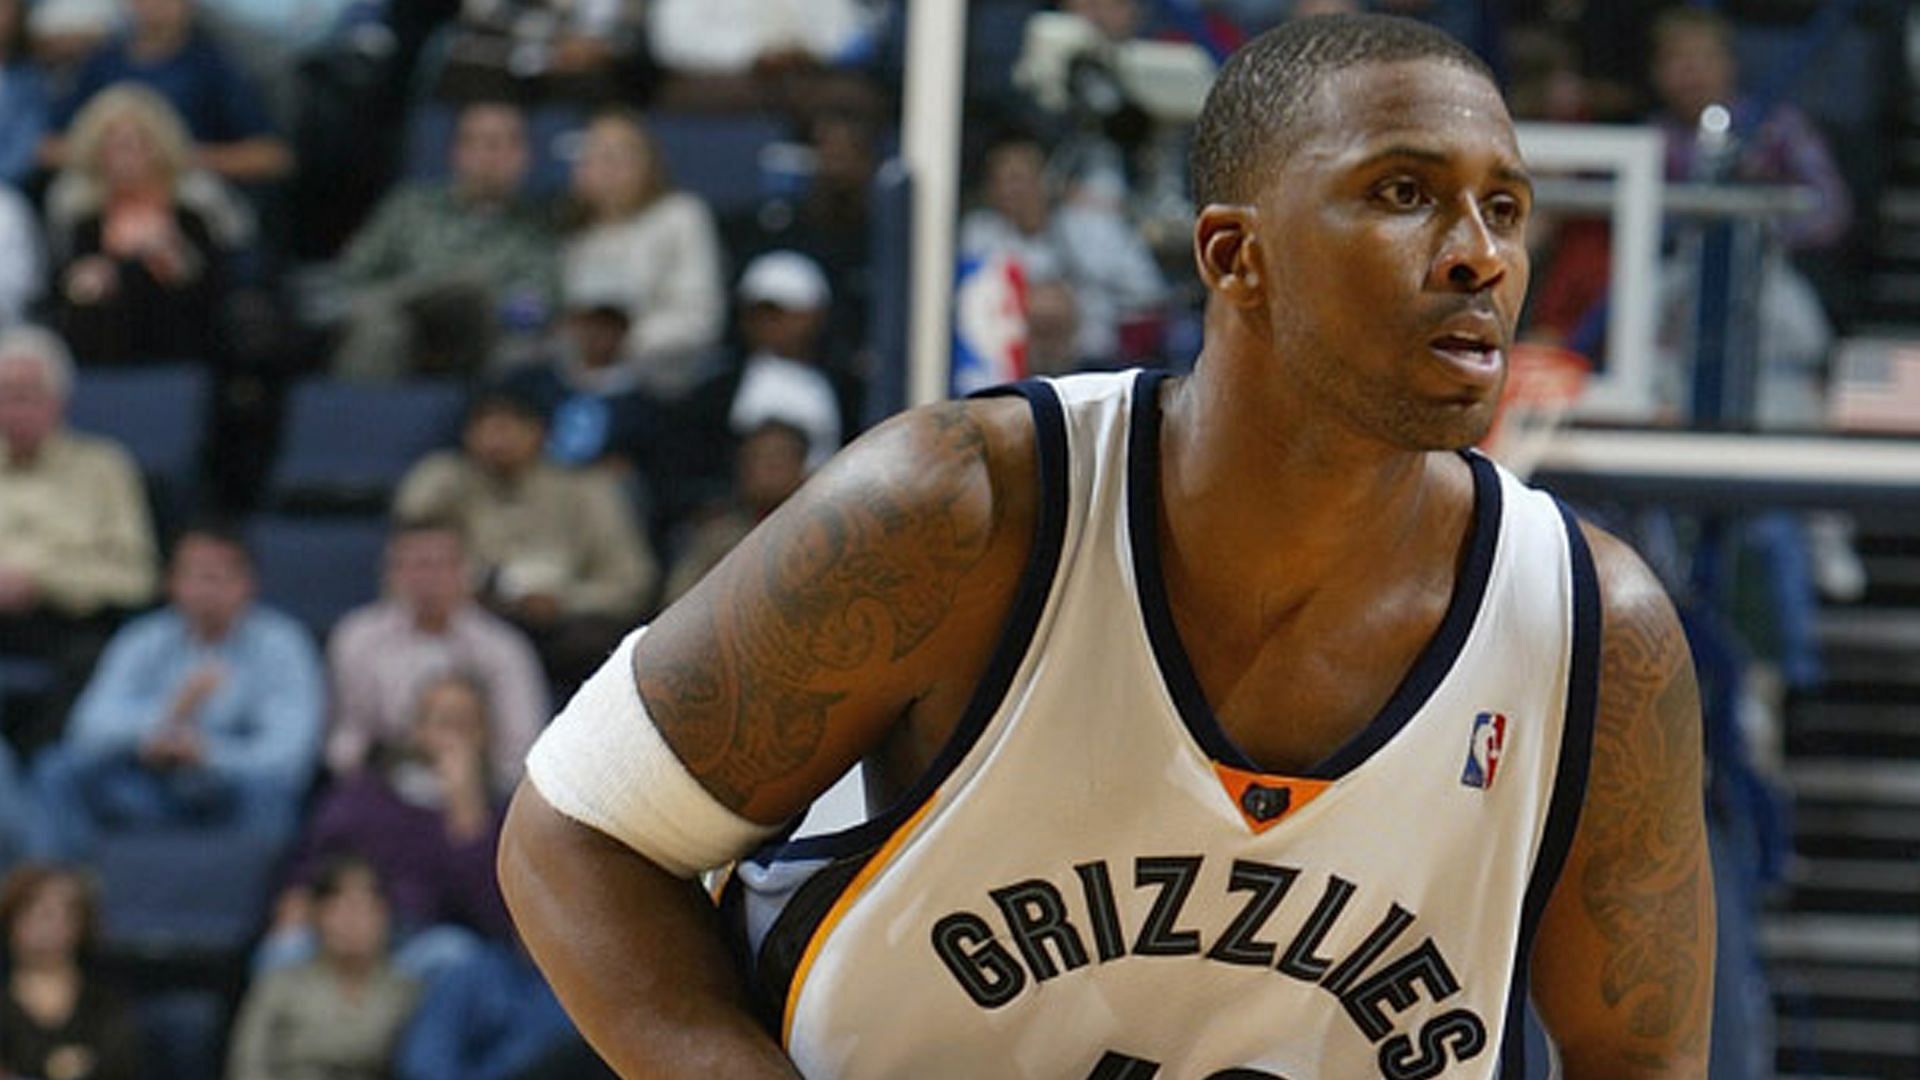 Lorenzen Wright in action for the Memphis Grizzlies [Source: CNN]